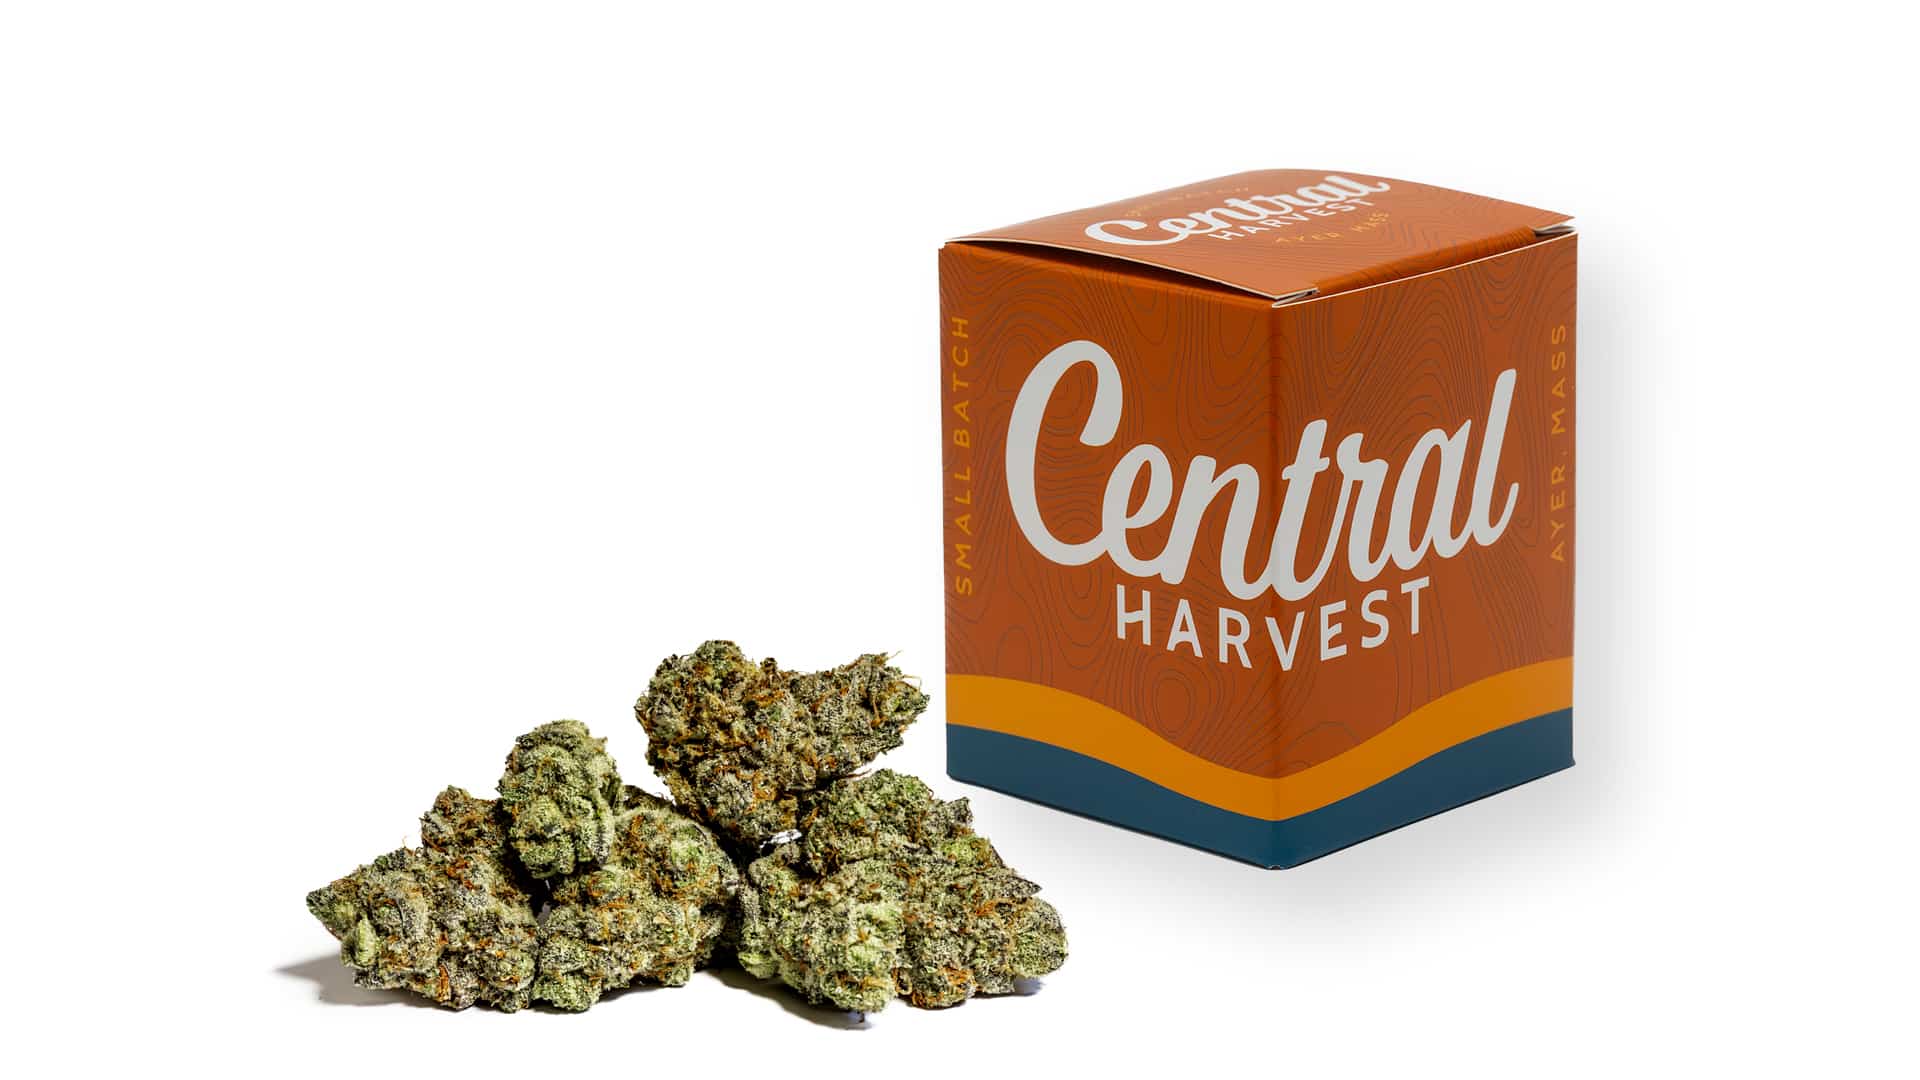 Peanut Butter & Chocolate is an Indica Cannabis Strain grown at Central Harvest